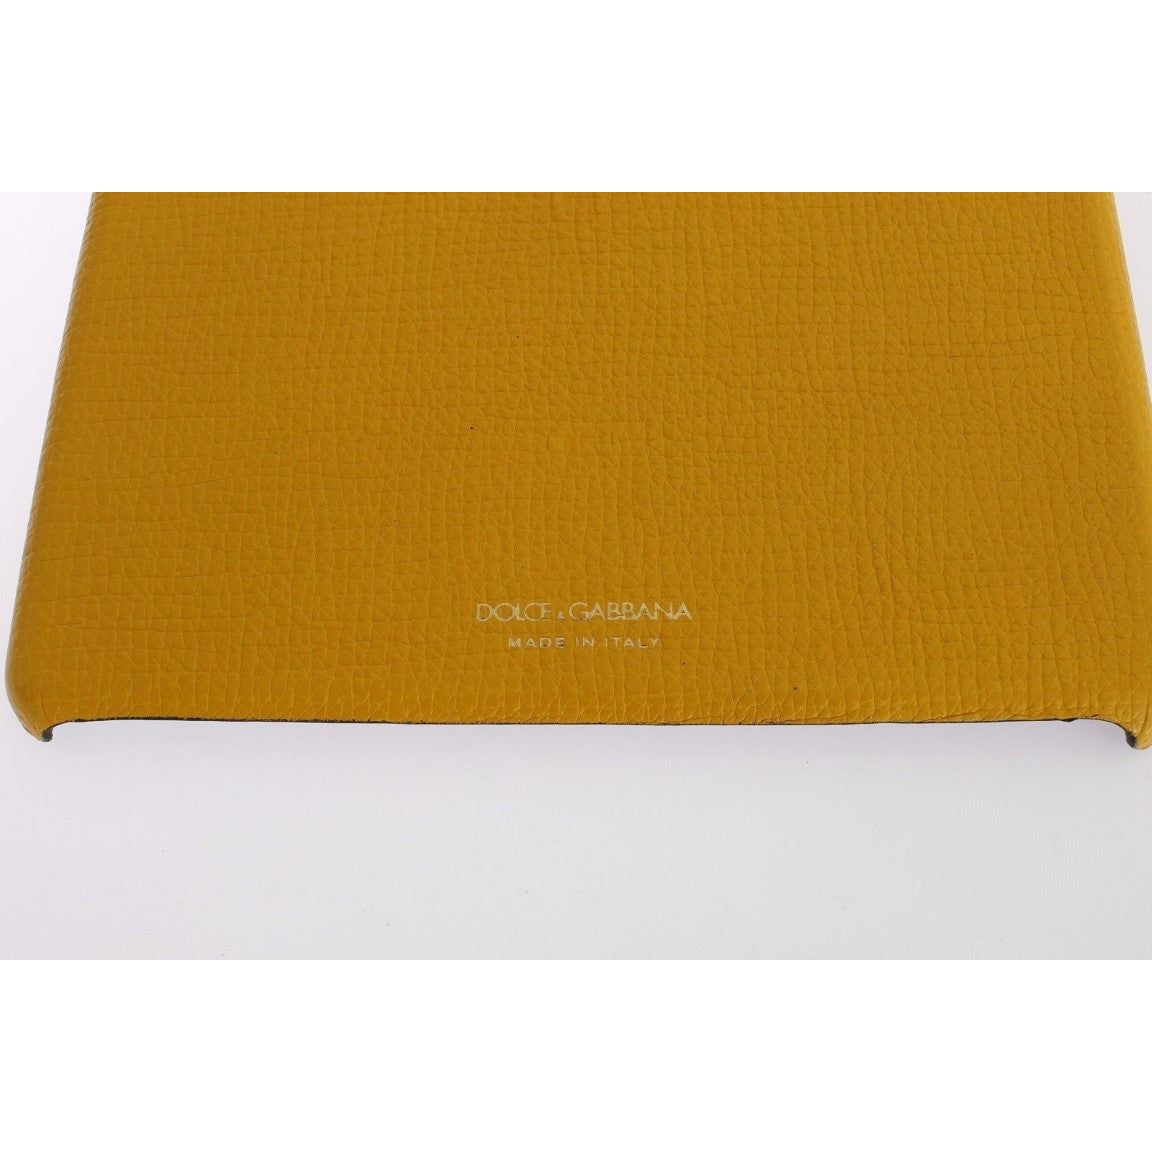 Dolce & Gabbana Chic Yellow Leather Tablet Case yellow-leather-tablet-ipad-case-cover